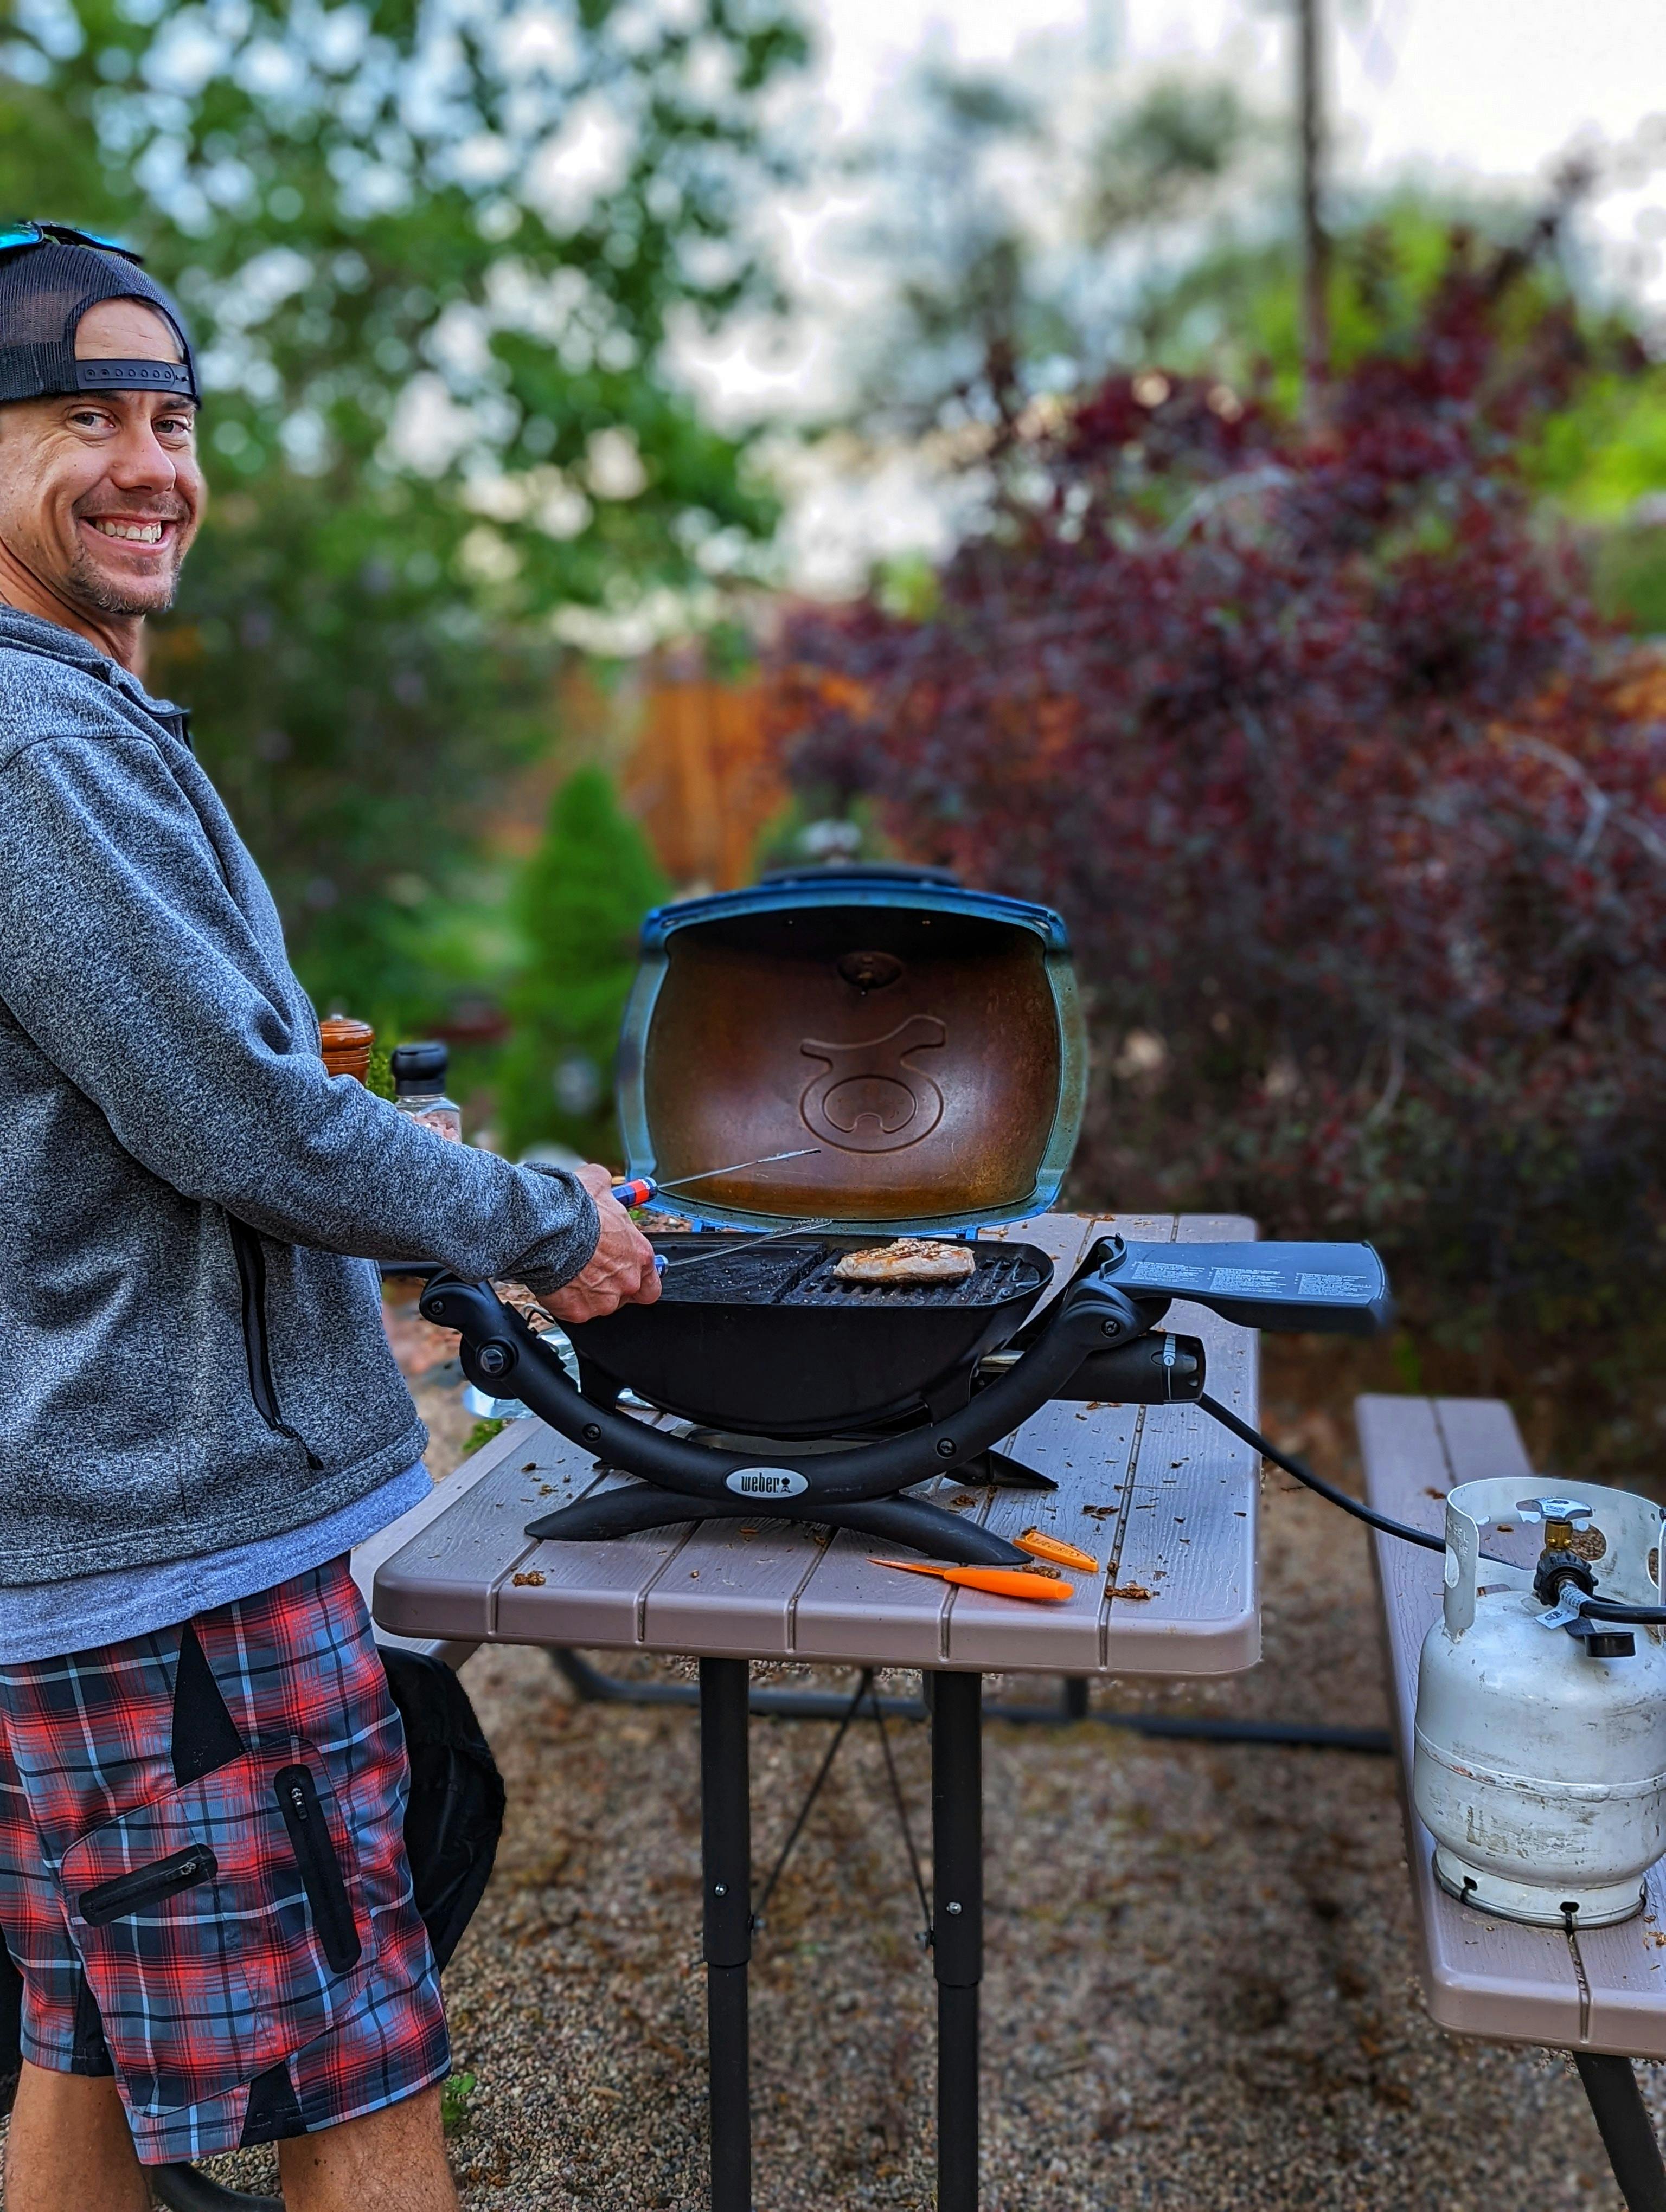 Dustin Bauer grilling with a reusable propane tank